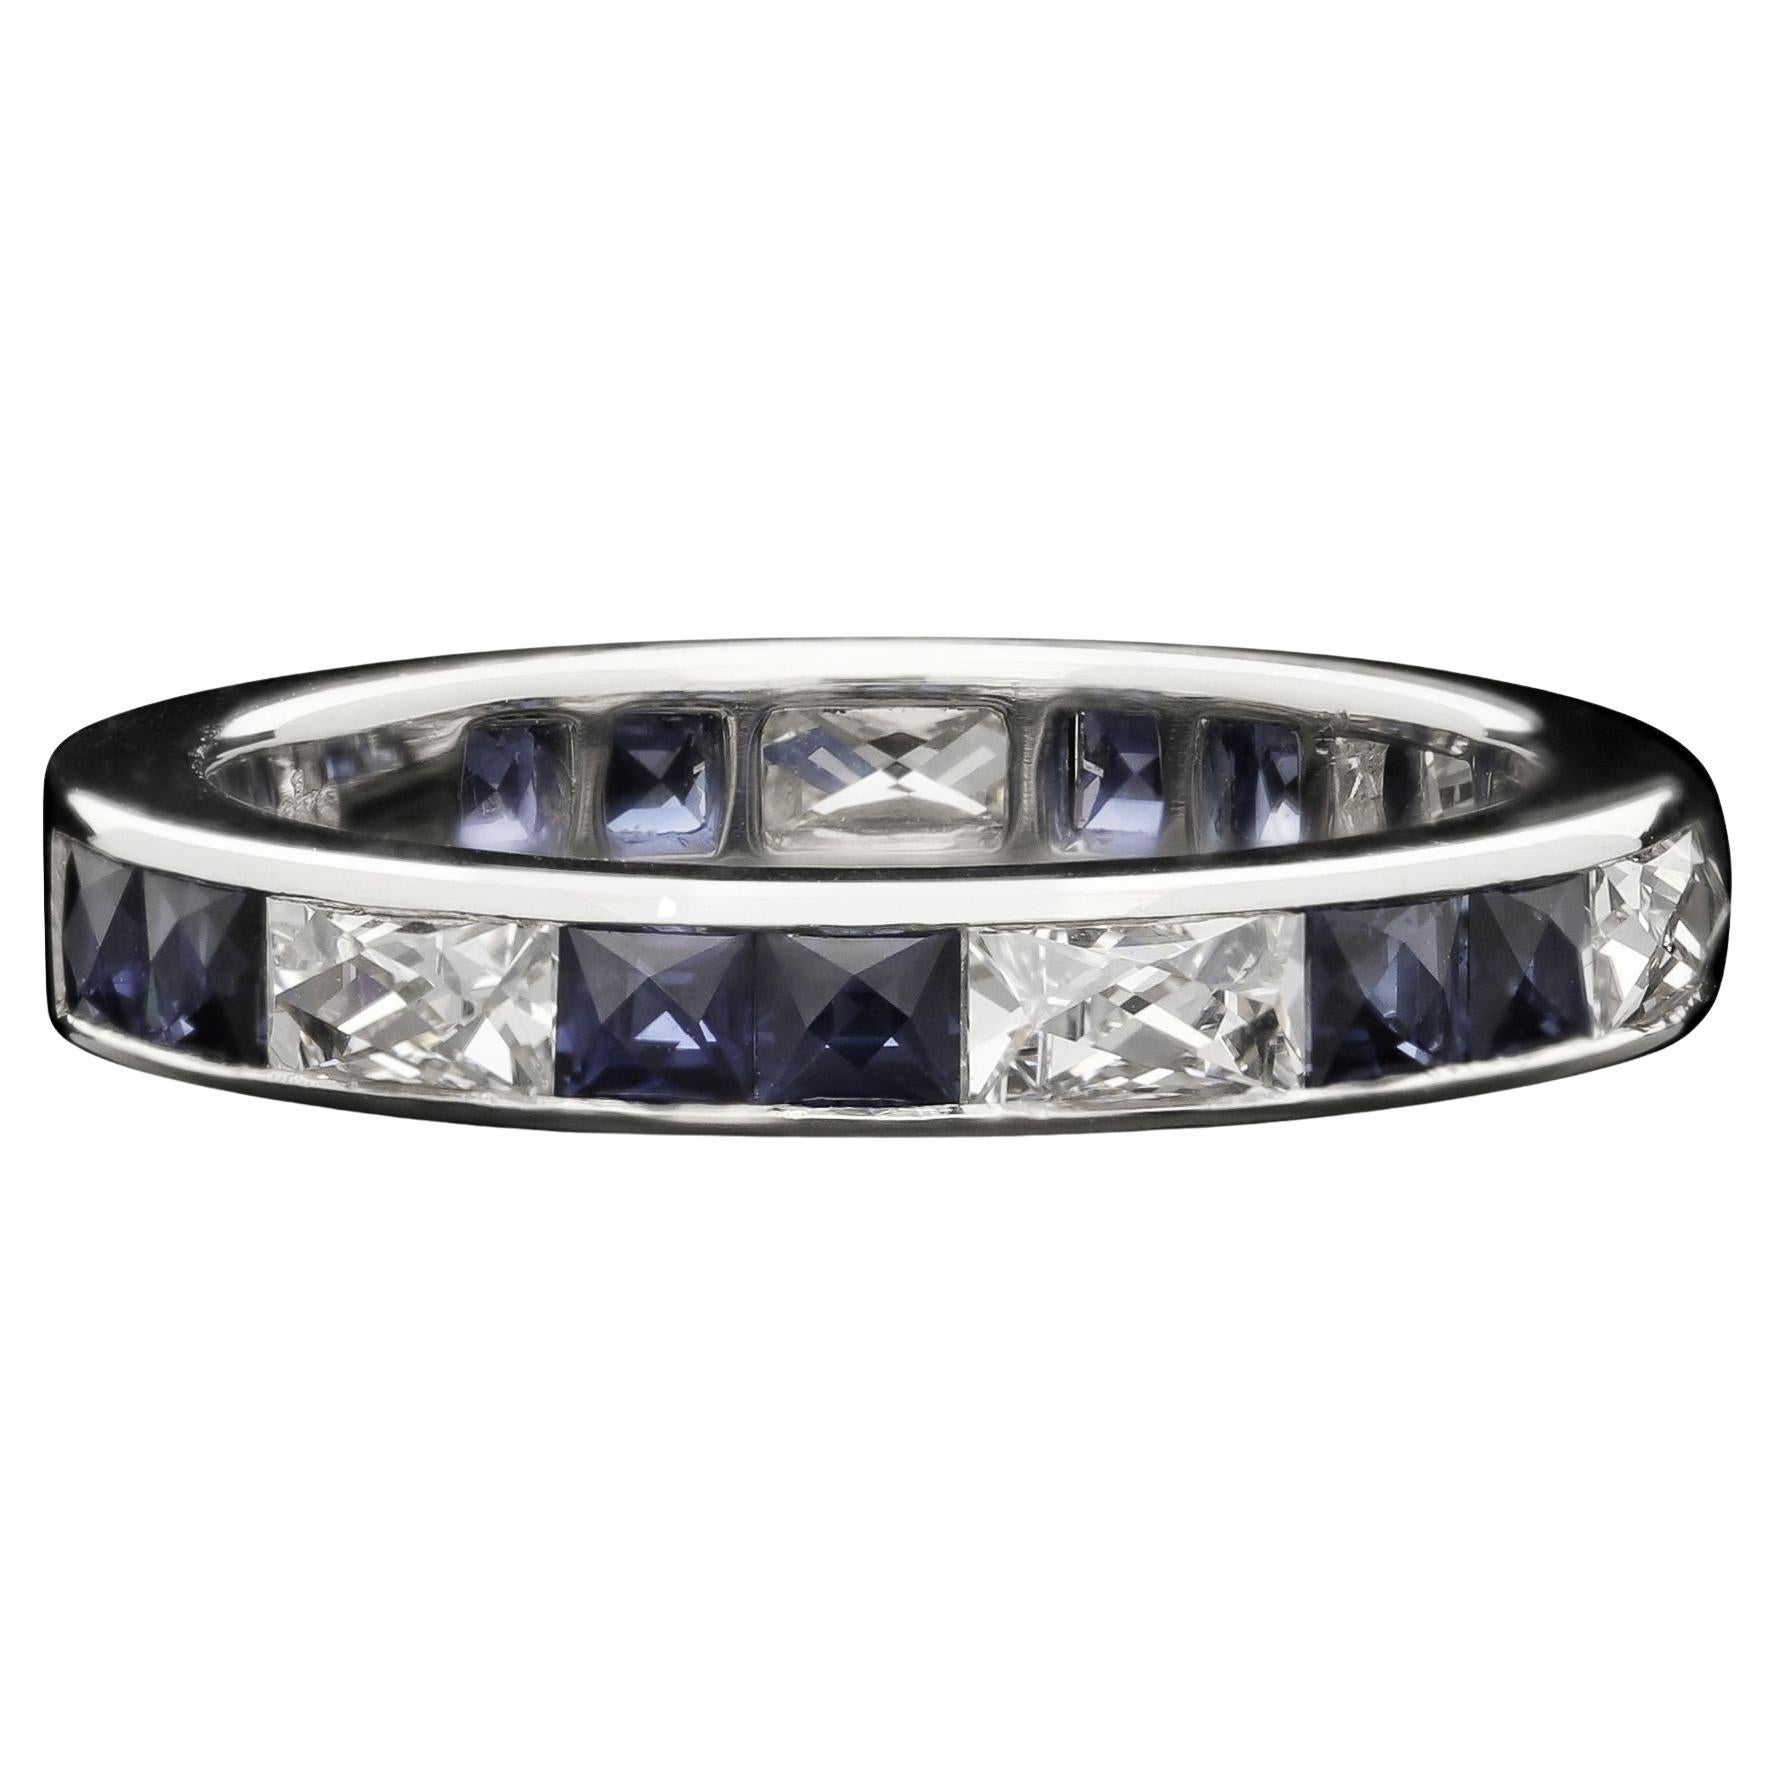 Hancocks Contemporary French Cut Diamond and Sapphire Eternity Ring in Platinum For Sale